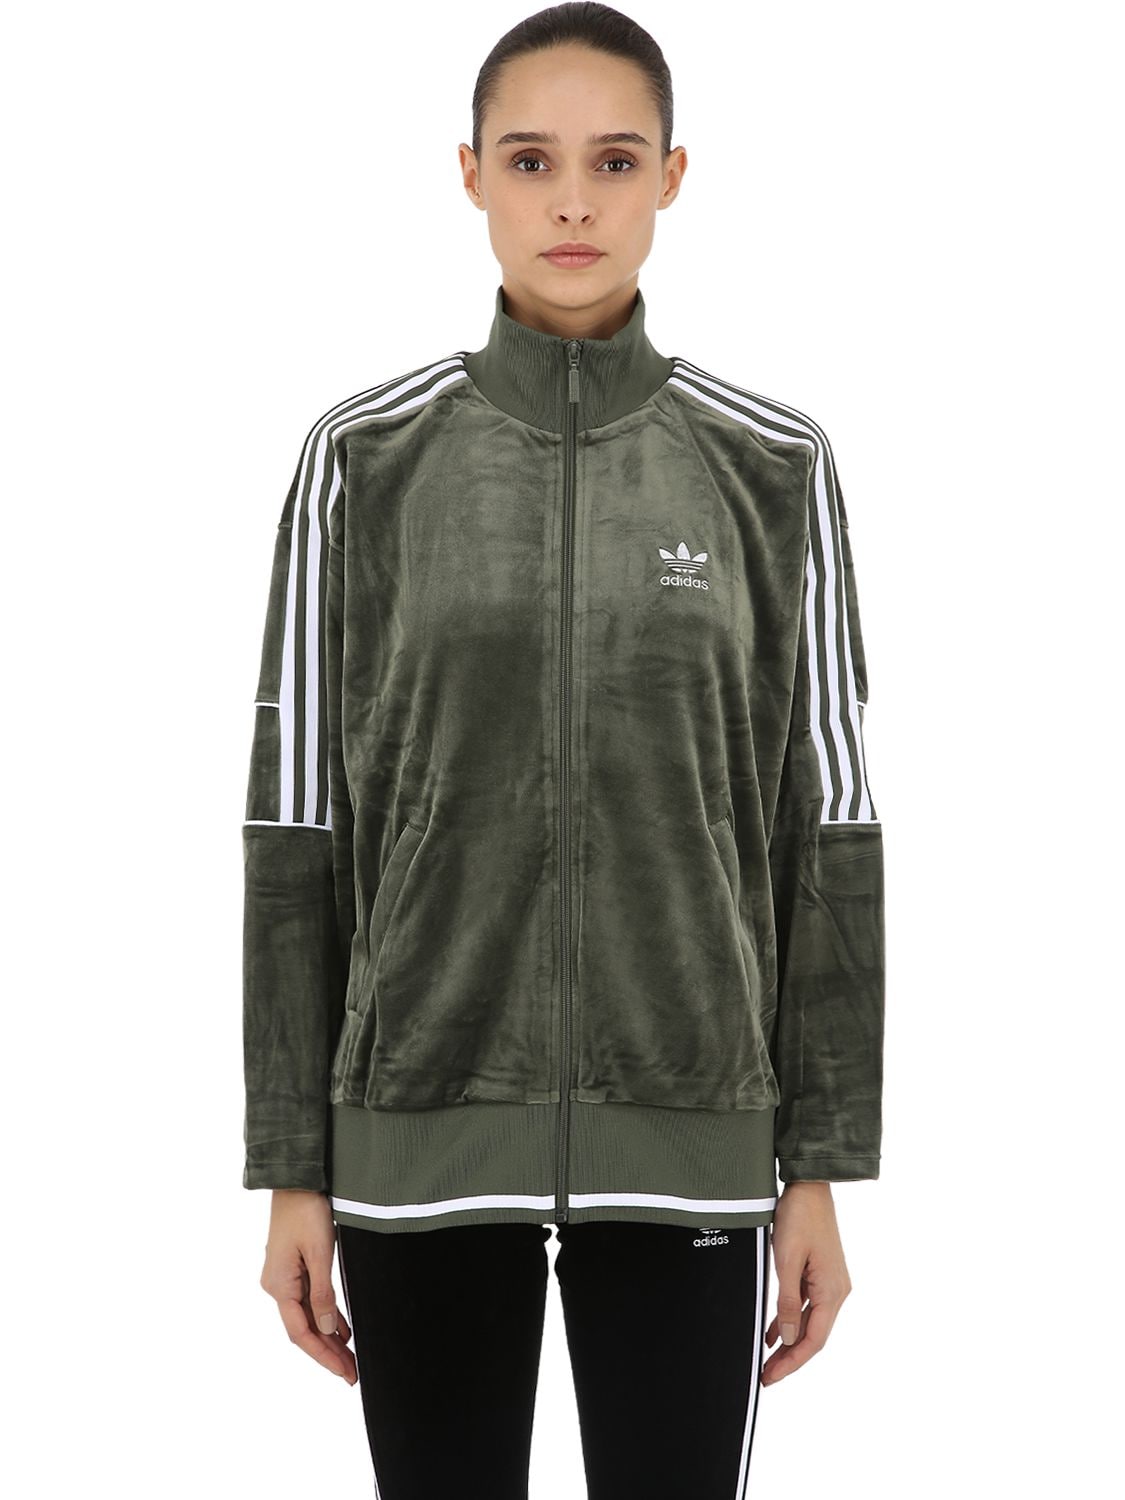 olive green adidas zip up